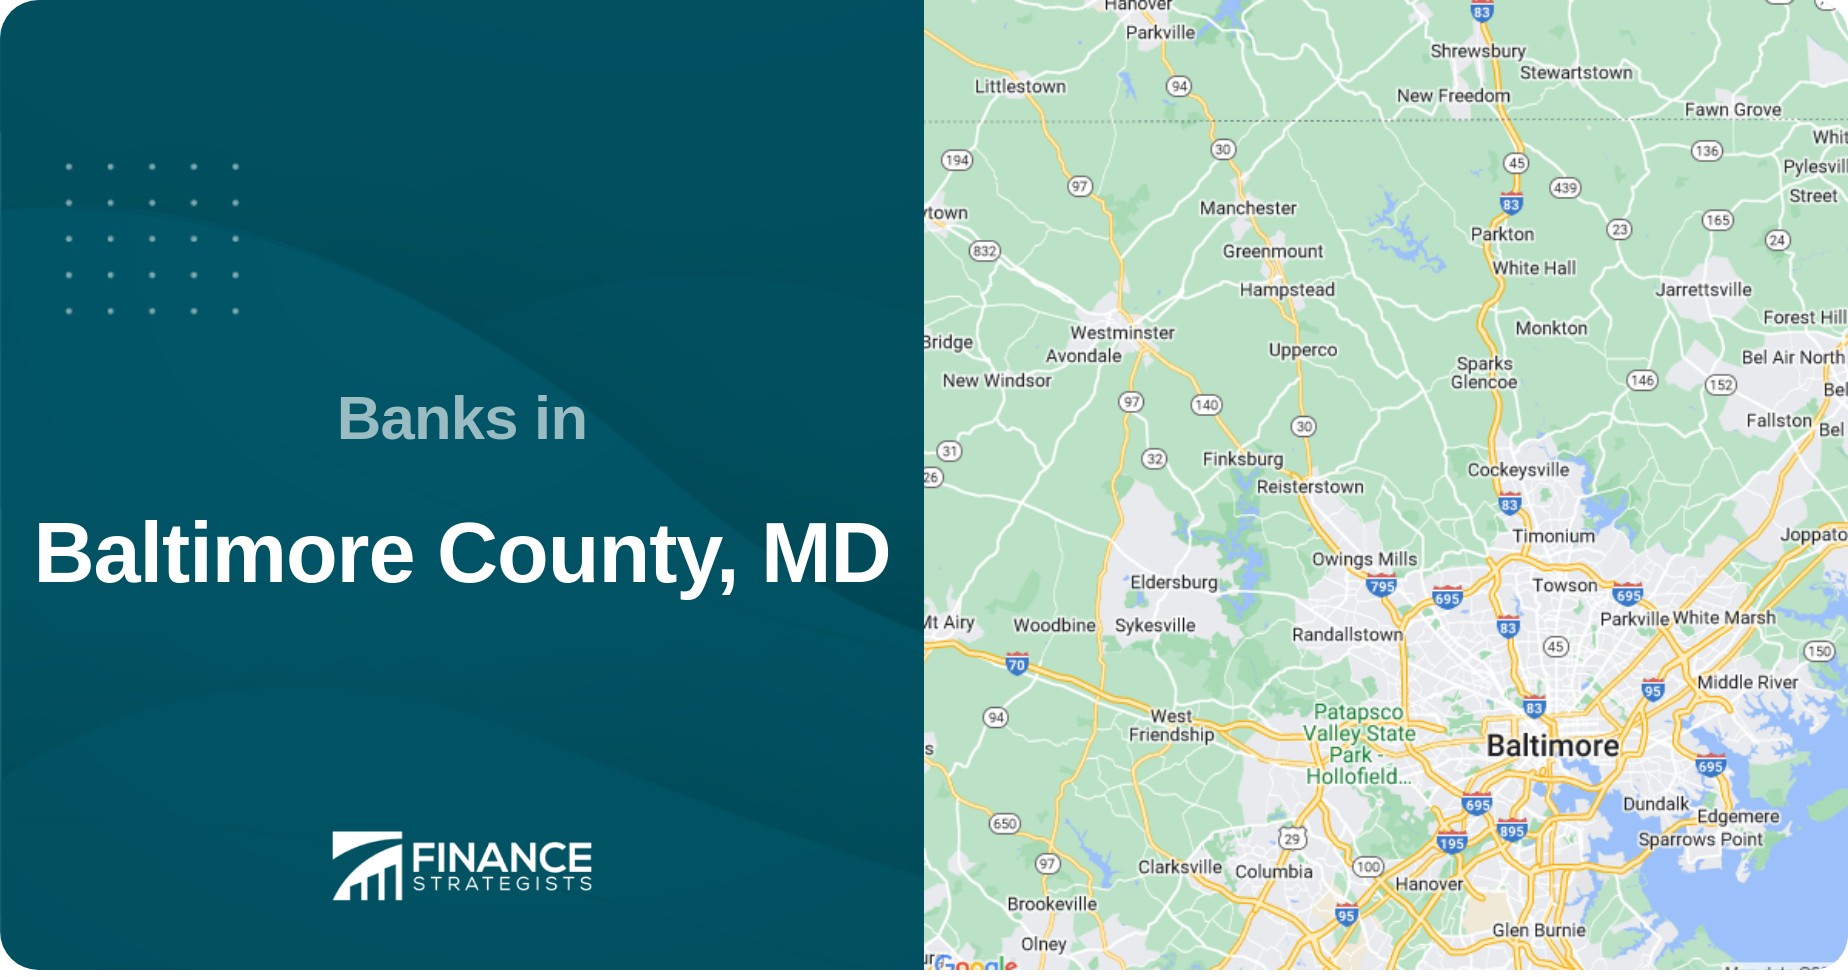 Banks in Baltimore County, MD